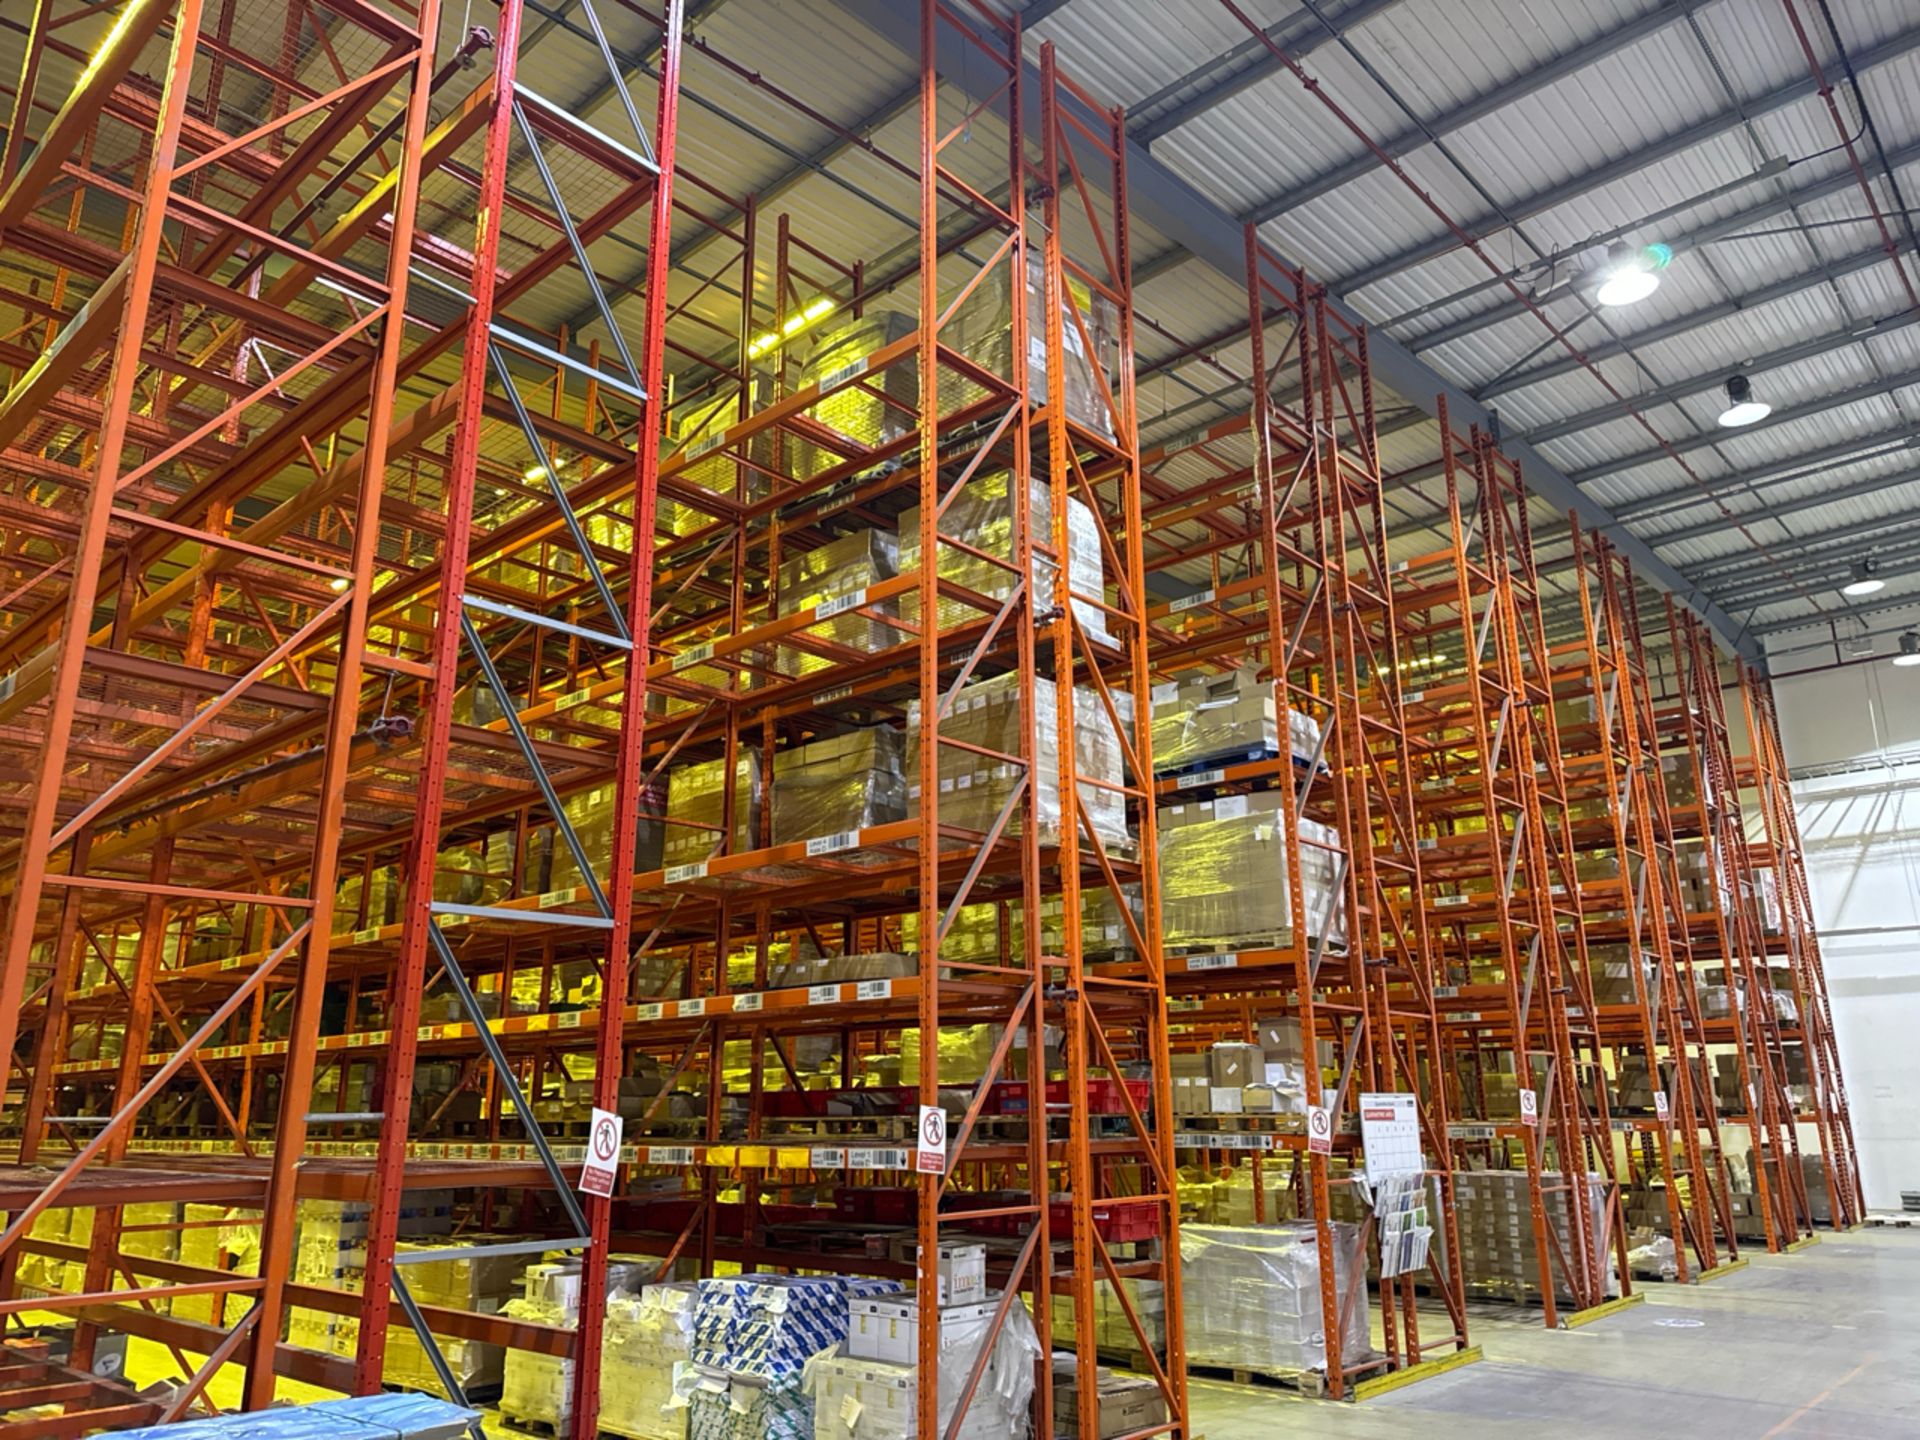 11 Bays Of Boltless Pallet Racking - Image 11 of 11